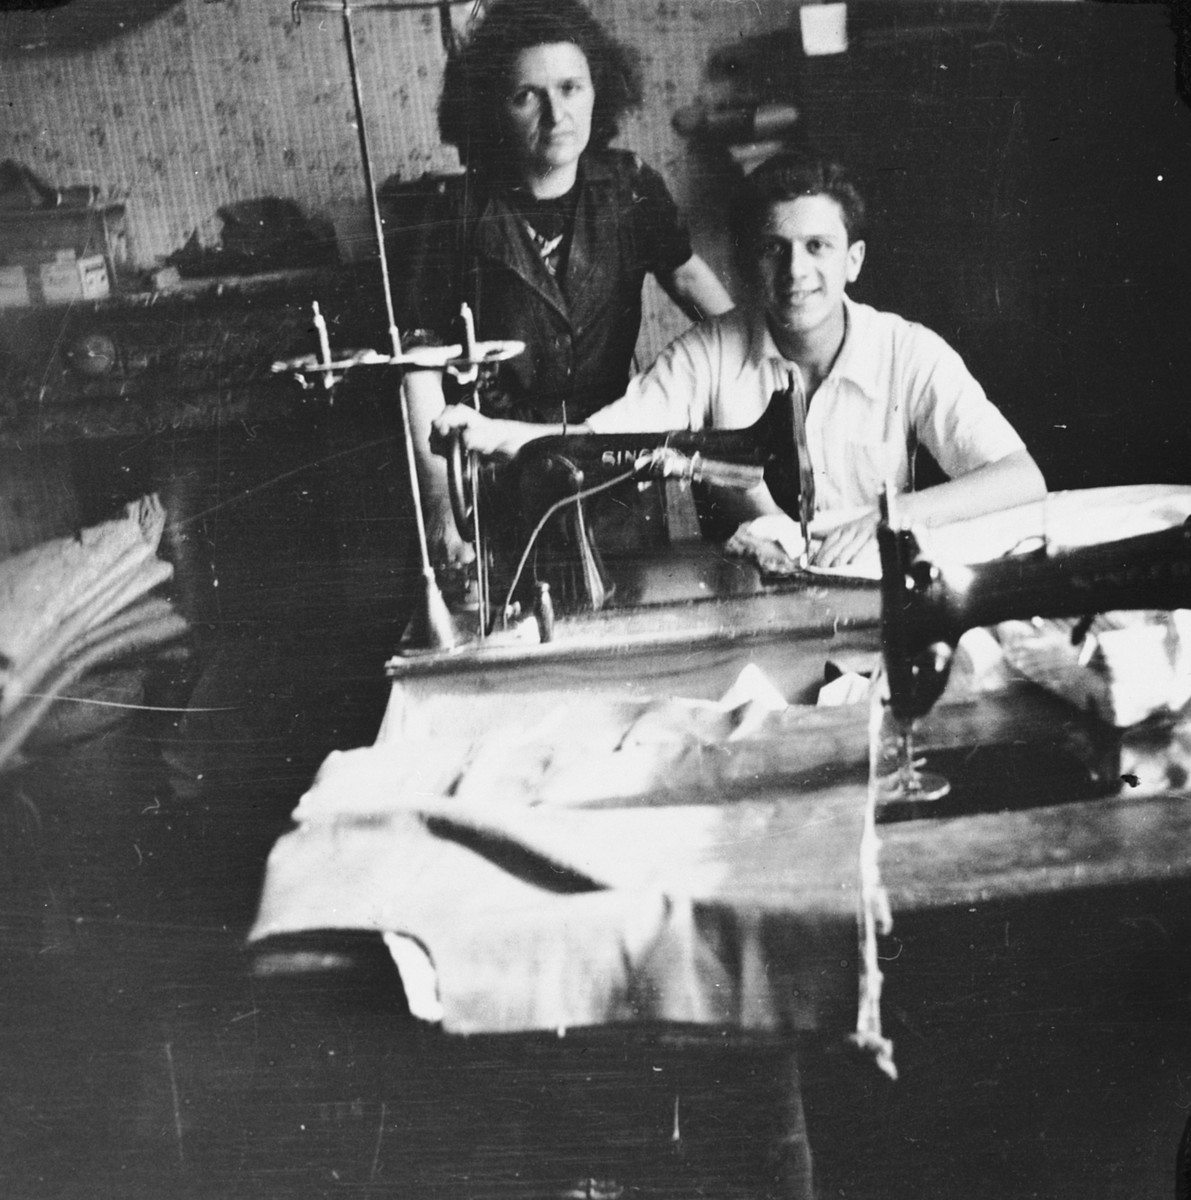 A Jewish woman who is living in hiding as a Christian in a factory in Brussels, poses with a young man who is seated at a sewing machine.

Pictured is Fani Mendelowicz.